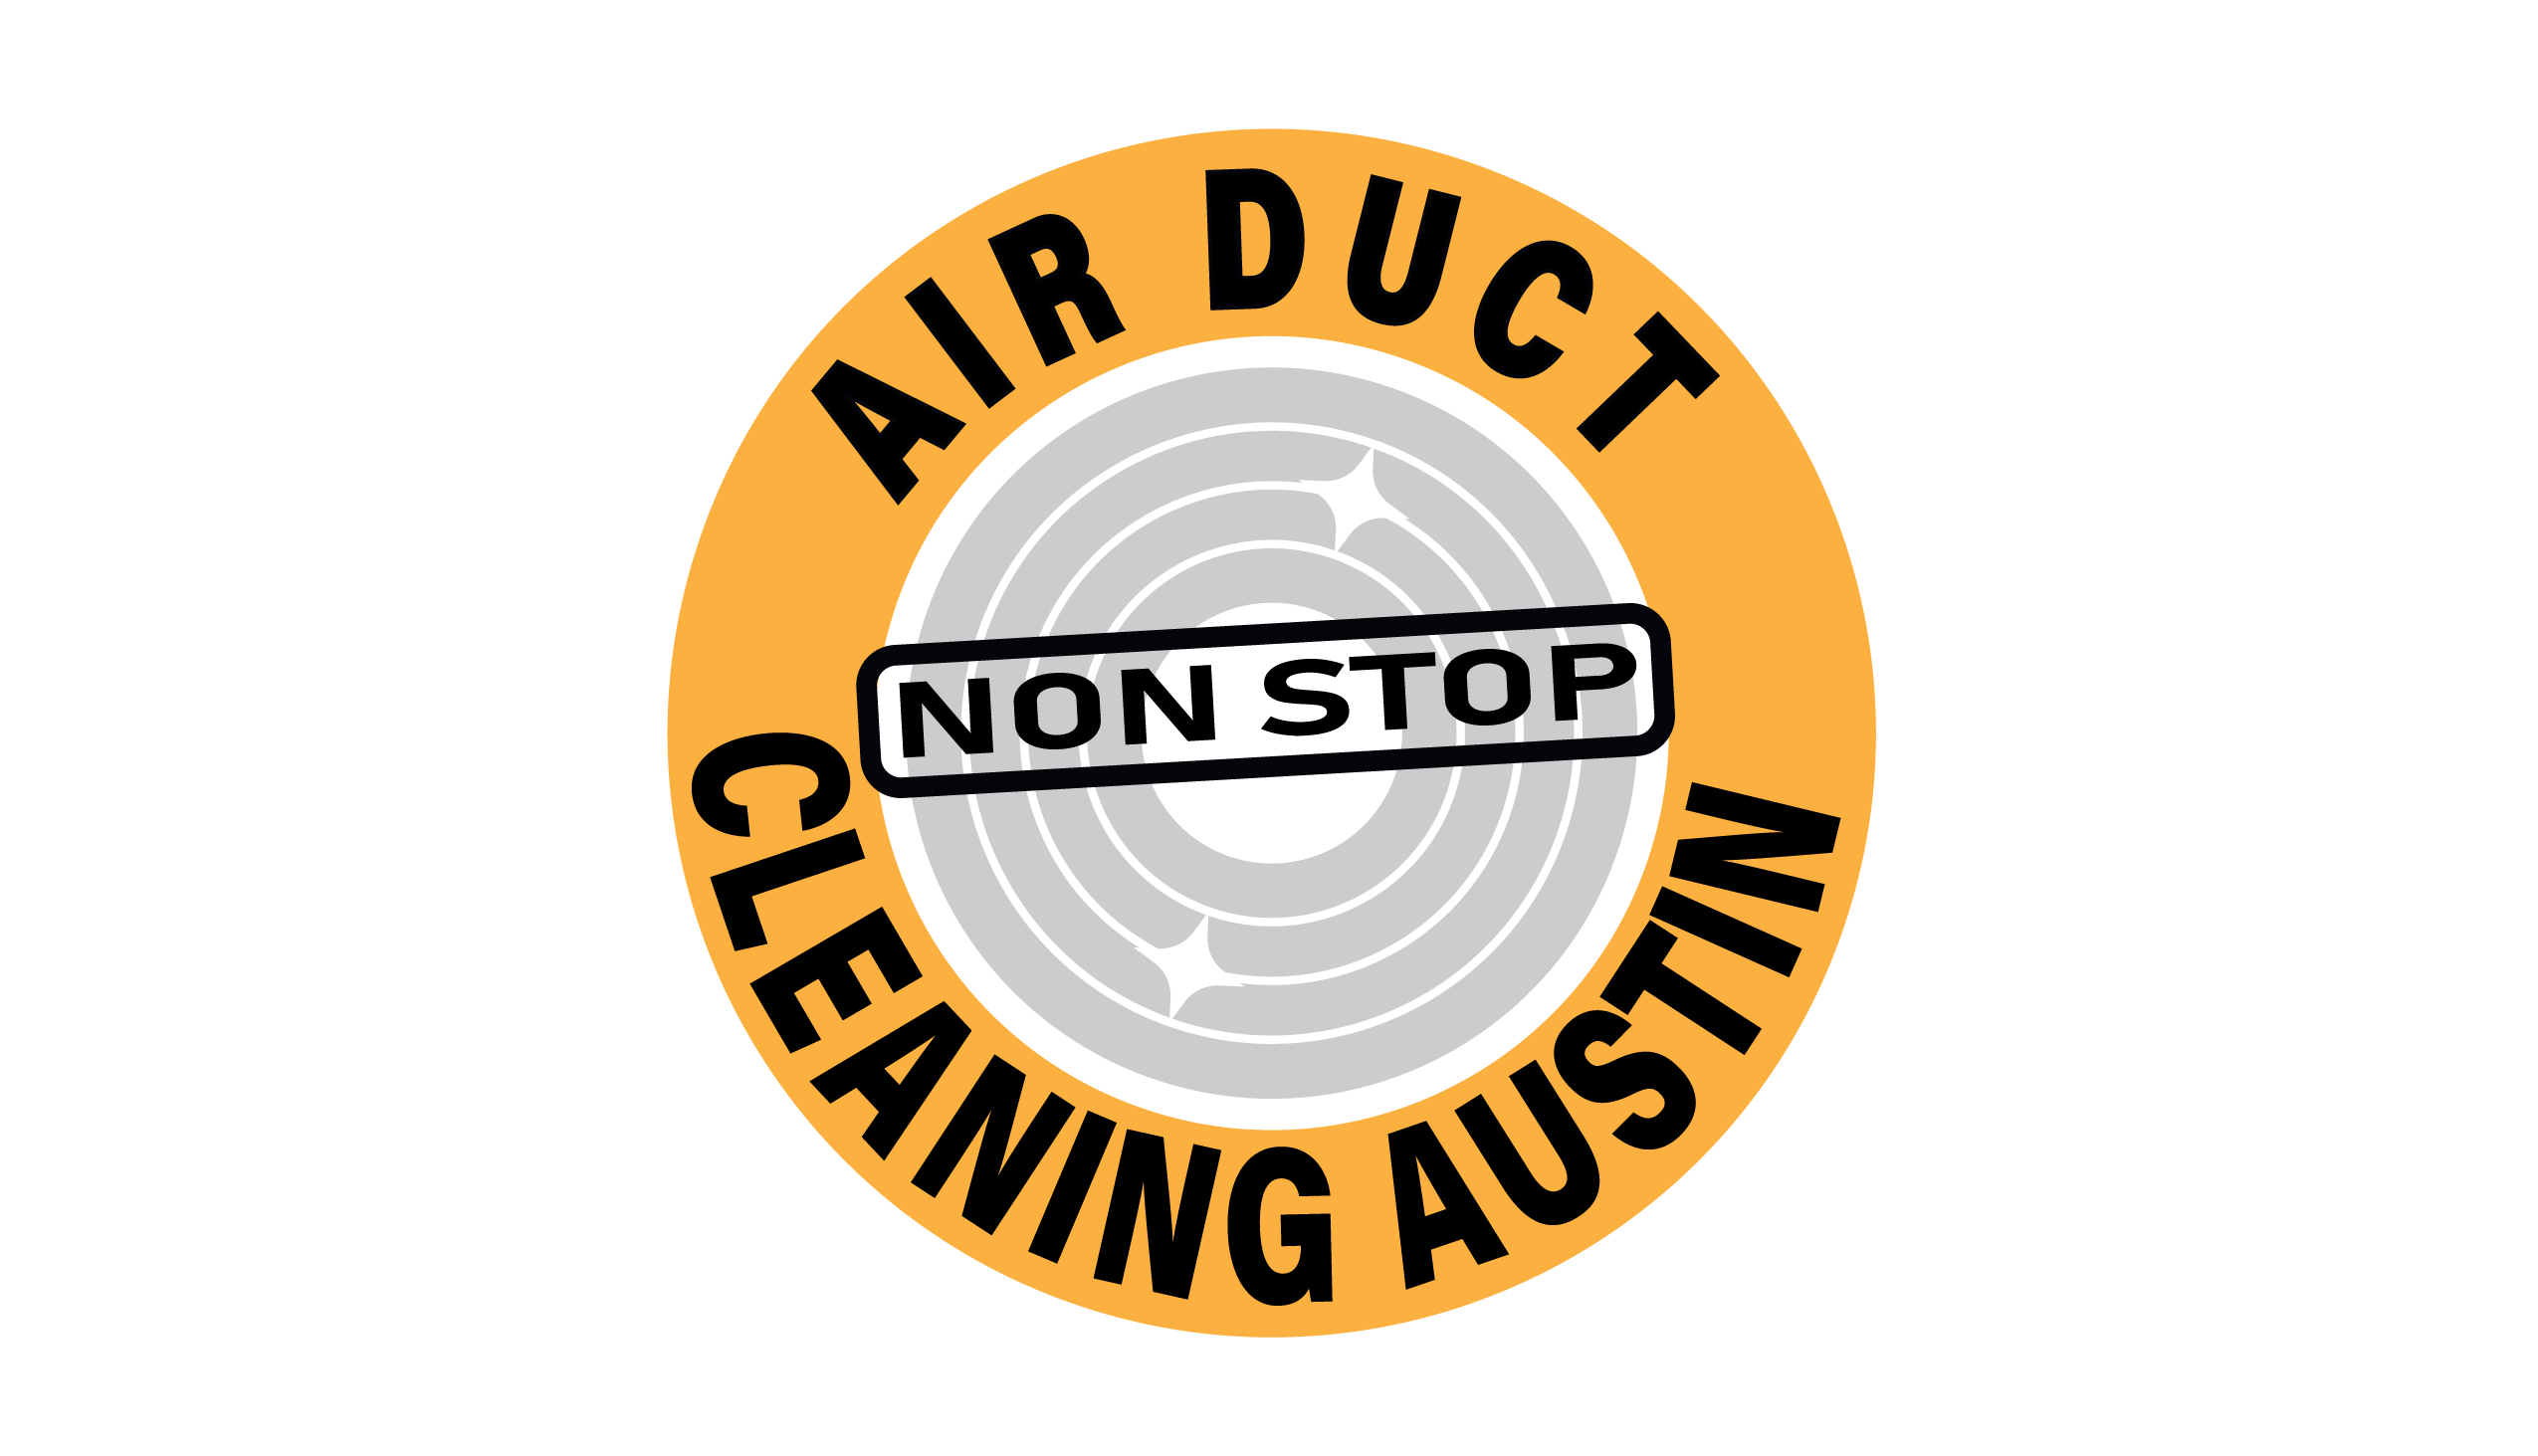 Nonstop air duct cleaning Austin offer First class and